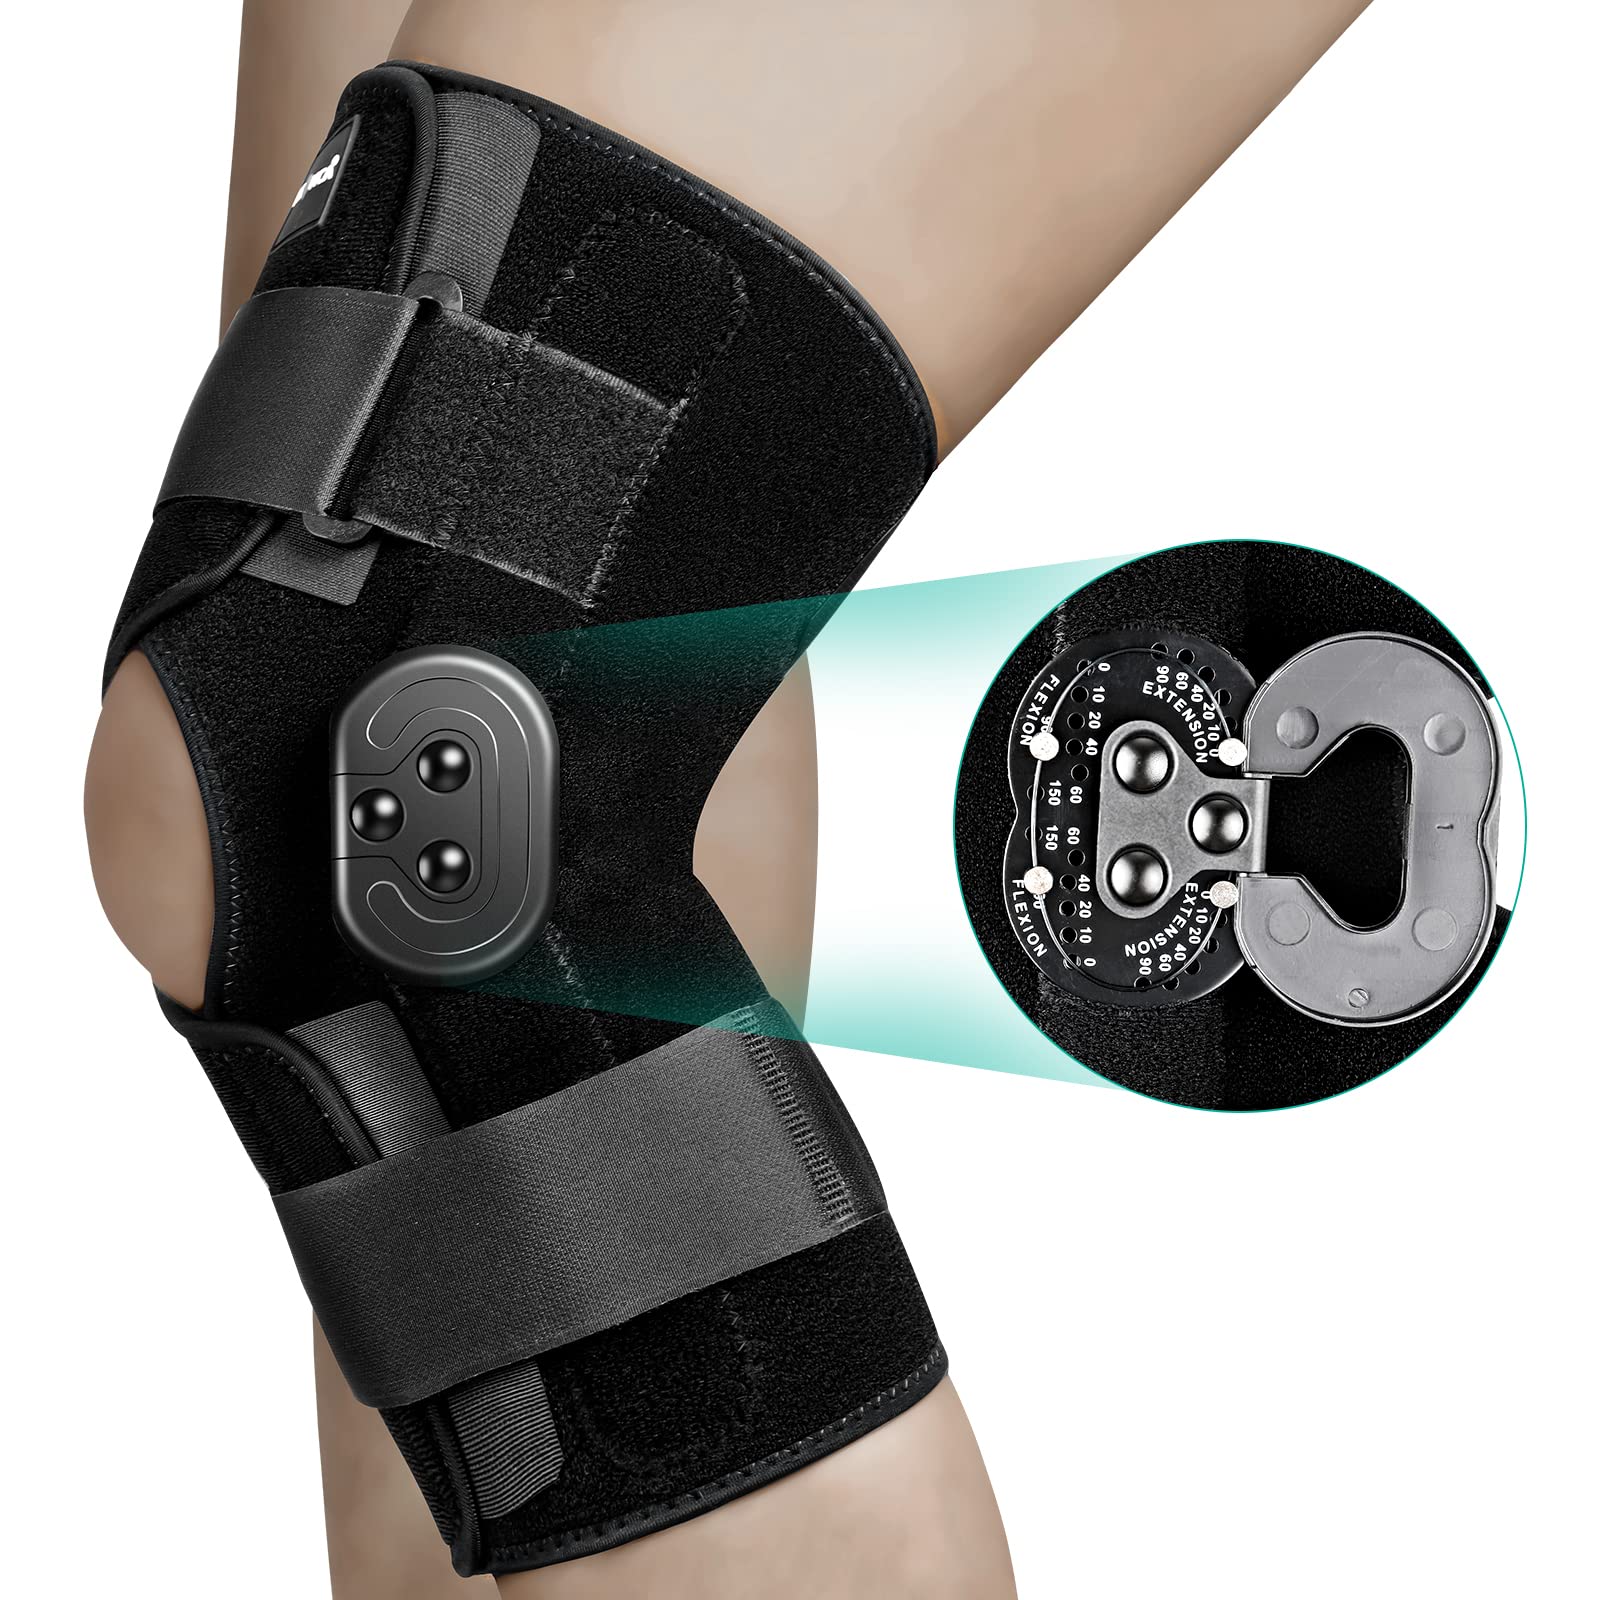 NEENCA Hinged Knee Brace, Adjustable Knee Immobilizer with Side Stabilizers  of Locking Dials, Medical ROM Knee Brace Support for Knee Pain, Arthritis,  ACL,PCL, Meniscus Tear, Injuries/Post OP Recovery